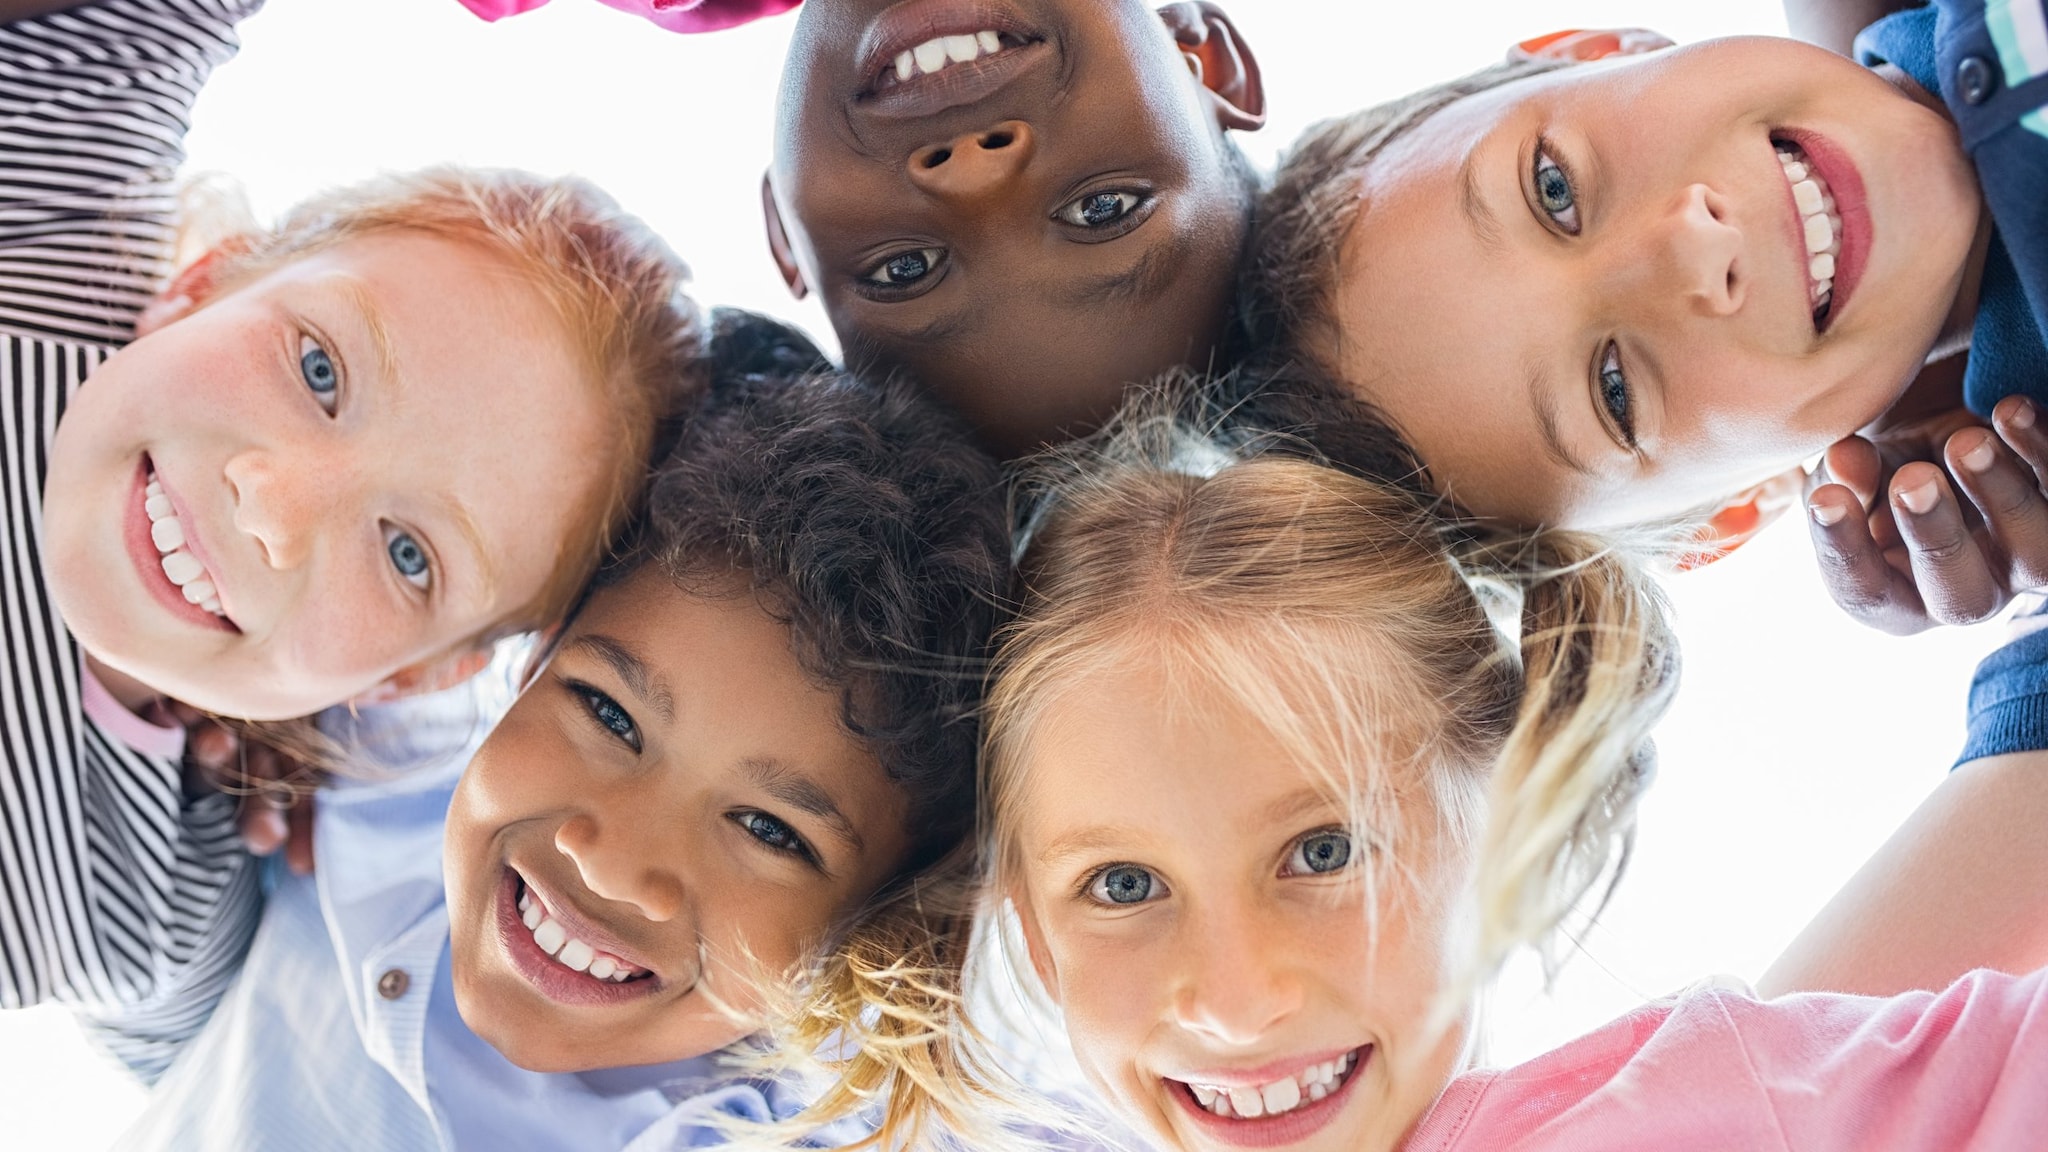 Five ethnically diverse children in a circle smiling happily down toward camera.